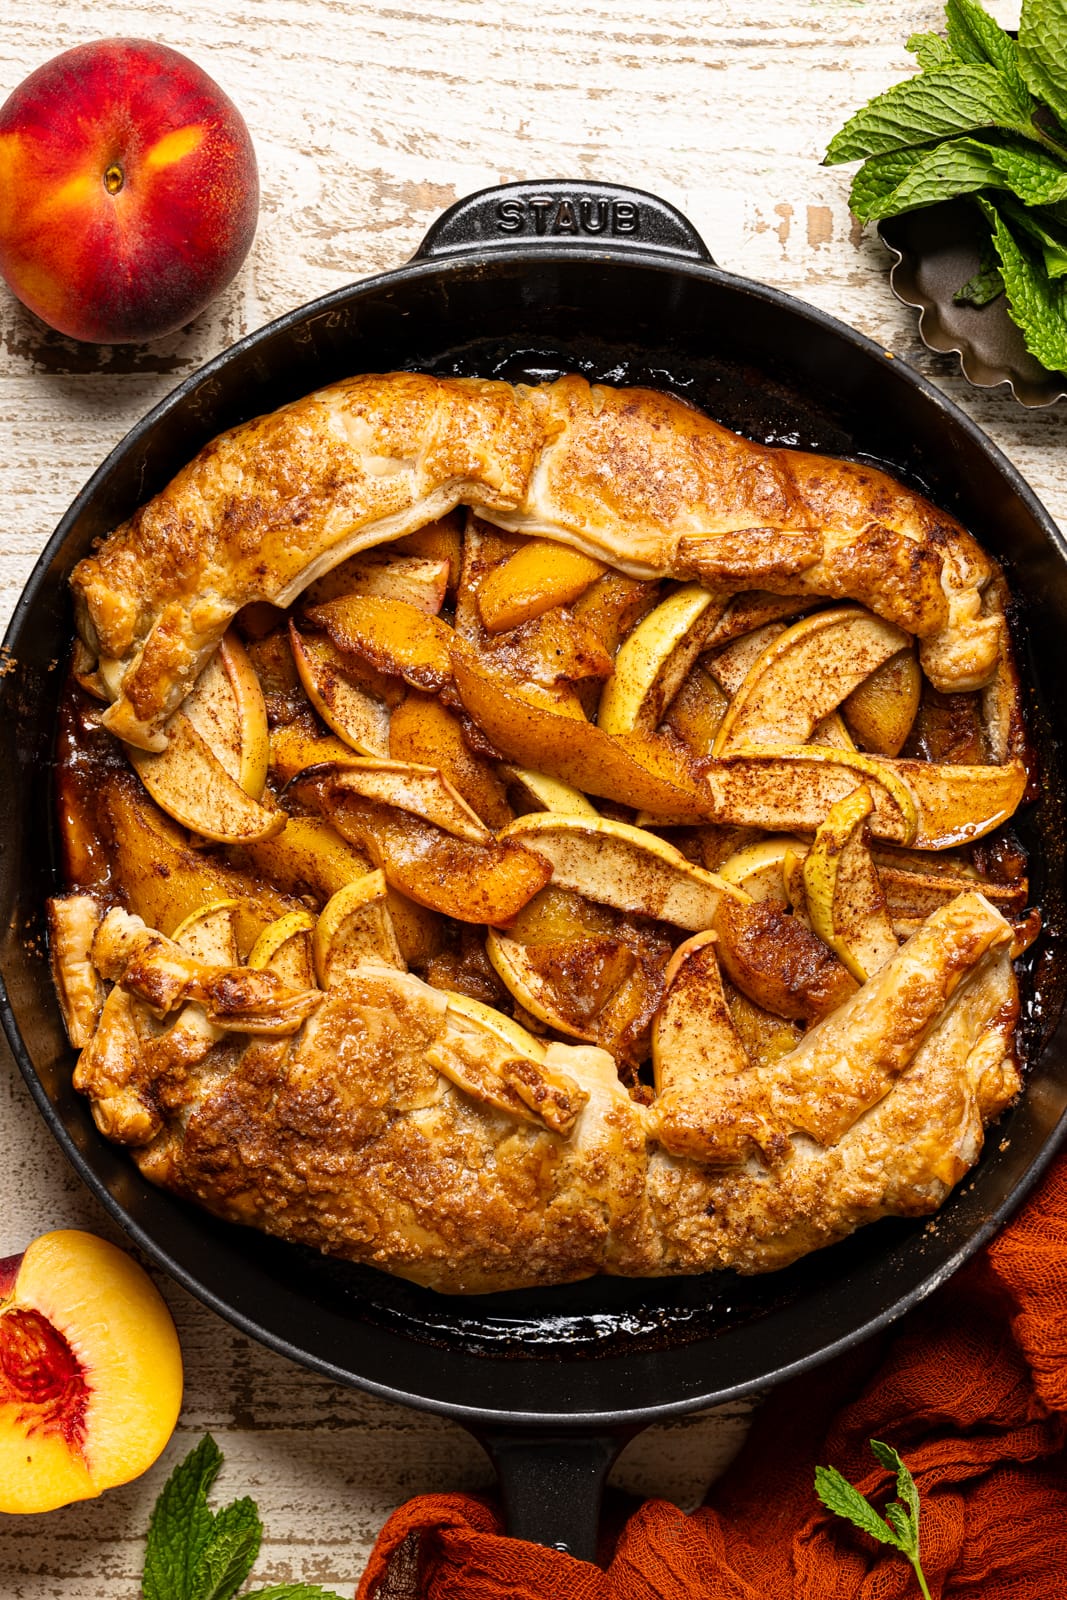 Baked easy peach apple galette with puff pastry in a black skillet with peaches and a red napkin.